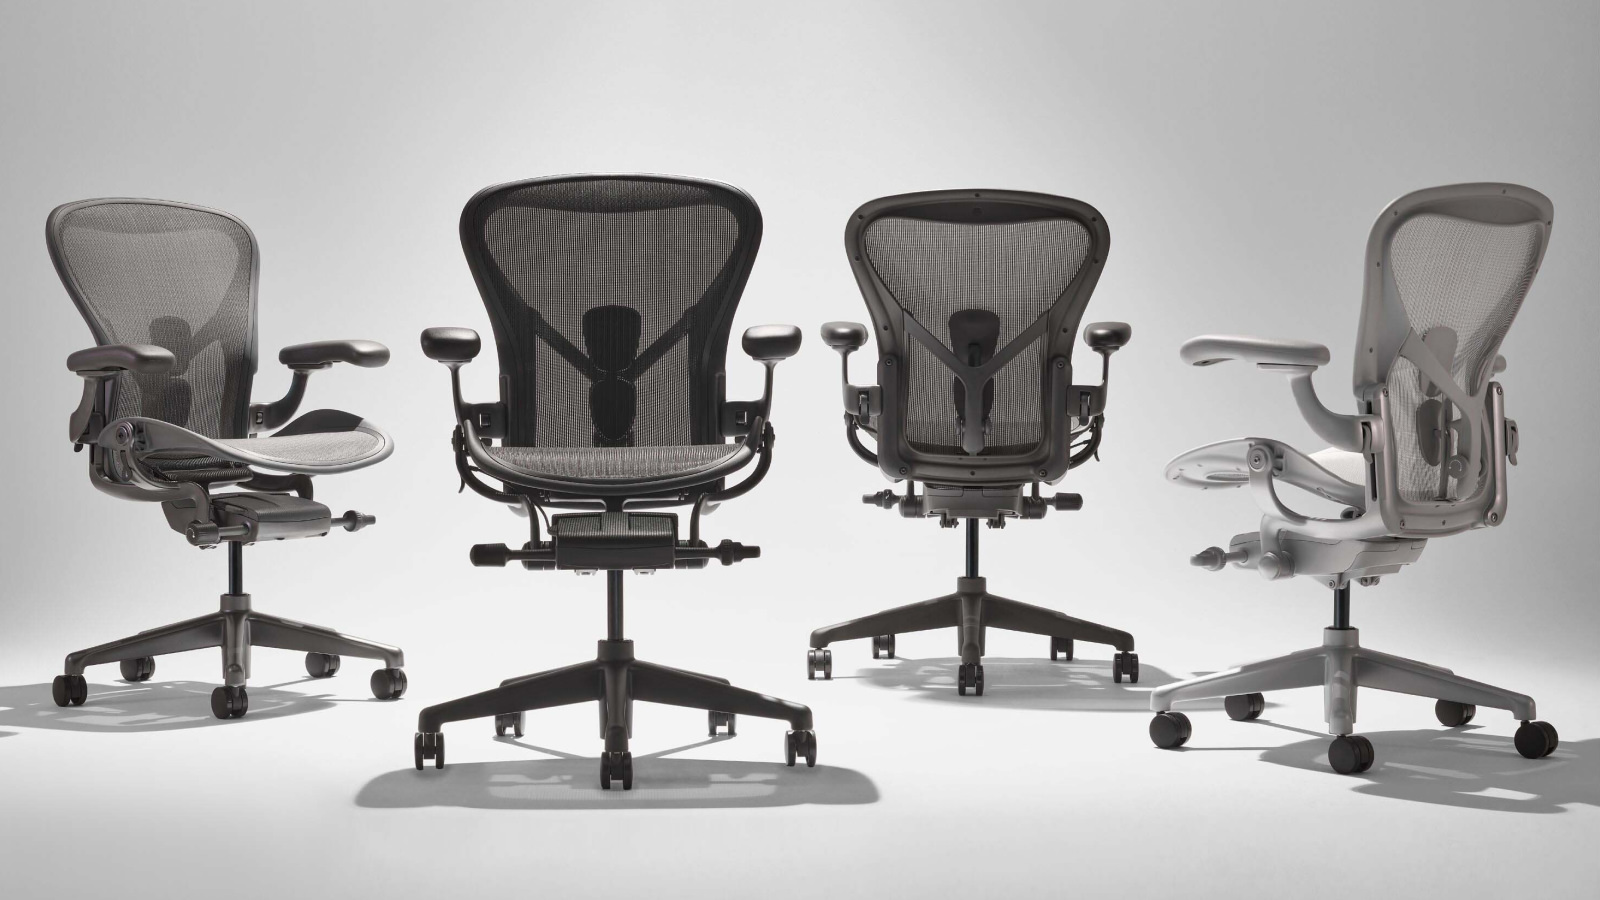 Four Aeron Chairs in four different colours.